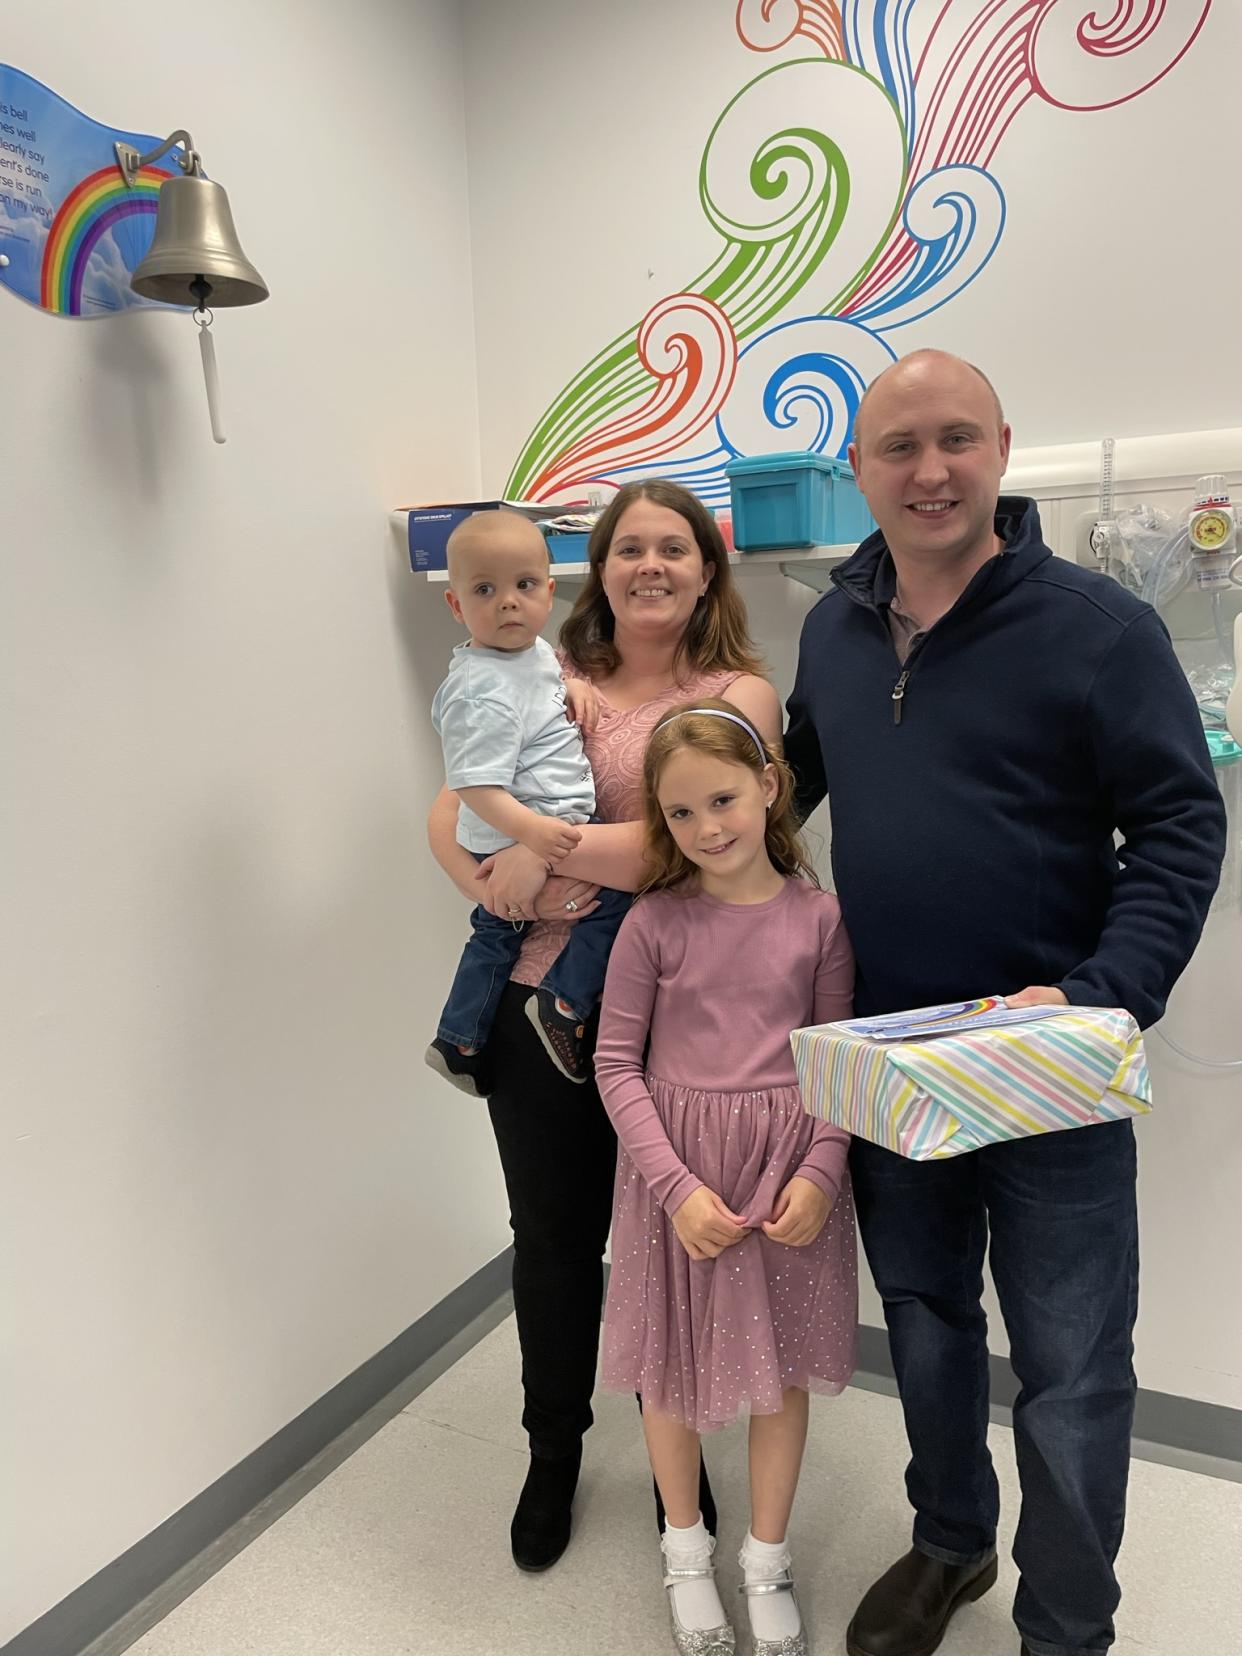 Hayley, 33, her partner, Andy, 30, Jessica, 7, and Jaxon, 2, ring the bell at hospital to commemorate his cancer-free diagnosis. (Hayley Barnes/SWNS)